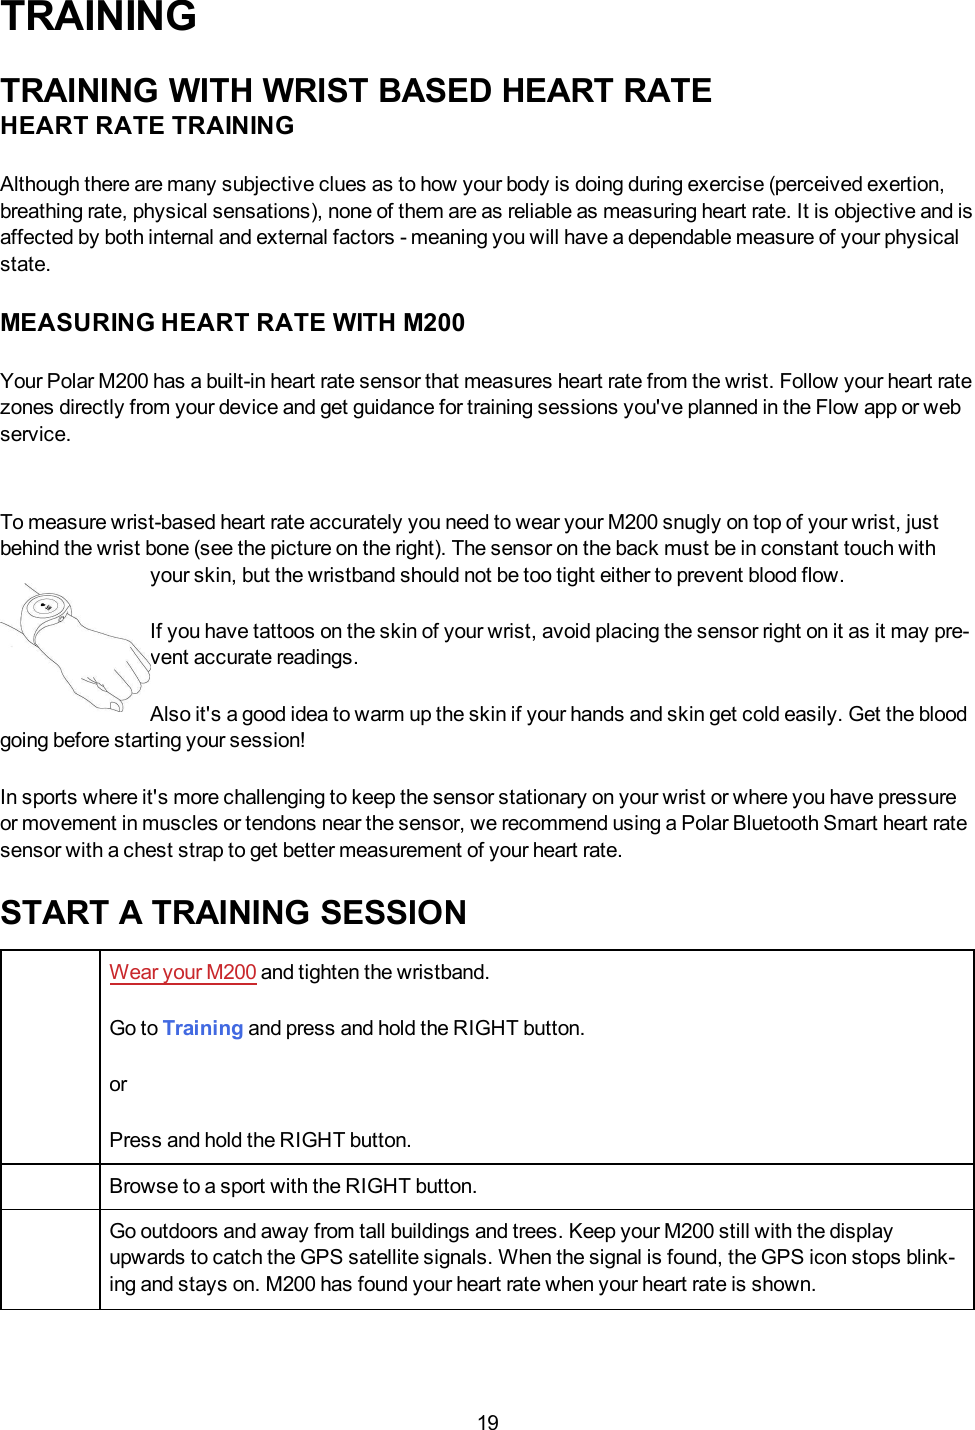 19TRAININGTRAINING WITH WRIST BASED HEART RATEHEART RATE TRAININGAlthough there are many subjective clues as to how your body is doing during exercise (perceived exertion,breathing rate, physical sensations), none of them are as reliable as measuring heart rate. It is objective and isaffected by both internal and external factors - meaning you will have a dependable measure of your physicalstate.MEASURING HEART RATE WITH M200Your Polar M200 has a built-in heart rate sensor that measures heart rate from the wrist. Follow your heart ratezones directly from your device and get guidance for training sessions you&apos;ve planned in the Flow app or webservice.To measure wrist-based heart rate accurately you need to wear your M200 snugly on top of your wrist, justbehind the wrist bone (see the picture on the right). The sensor on the back must be in constant touch withyour skin, but the wristband should not be too tight either to prevent blood flow.If you have tattoos on the skin of your wrist, avoid placing the sensor right on it as it may pre-vent accurate readings.Also it&apos;s a good idea to warm up the skin if your hands and skin get cold easily. Get the bloodgoing before starting your session!In sports where it&apos;s more challenging to keep the sensor stationary on your wrist or where you have pressureor movement in muscles or tendons near the sensor, we recommend using a Polar Bluetooth Smart heart ratesensor with a chest strap to get better measurement of your heart rate.START A TRAINING SESSIONWear your M200 and tighten the wristband.Go to Training and press and hold the RIGHT button.orPress and hold the RIGHTbutton.Browse to a sport with the RIGHT button.Go outdoors and away from tall buildings and trees. Keep your M200 still with the displayupwards to catch the GPS satellite signals. When the signal is found, the GPS icon stops blink-ing and stays on. M200 has found your heart rate when your heart rate is shown.